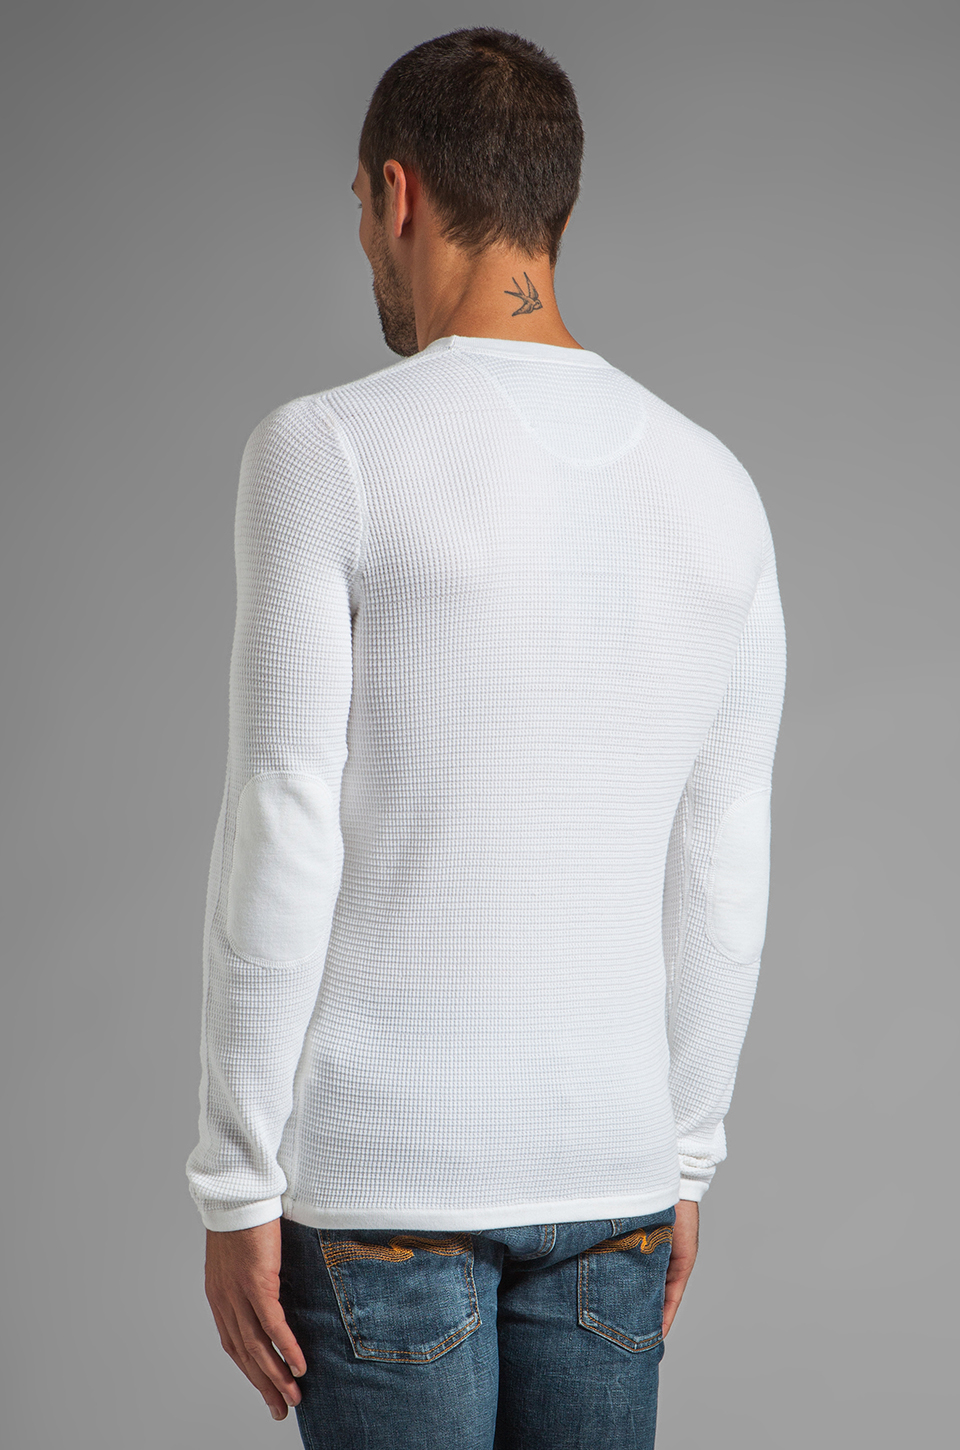 Vince Thermal Crew Neck Sweater in White for Men - Lyst